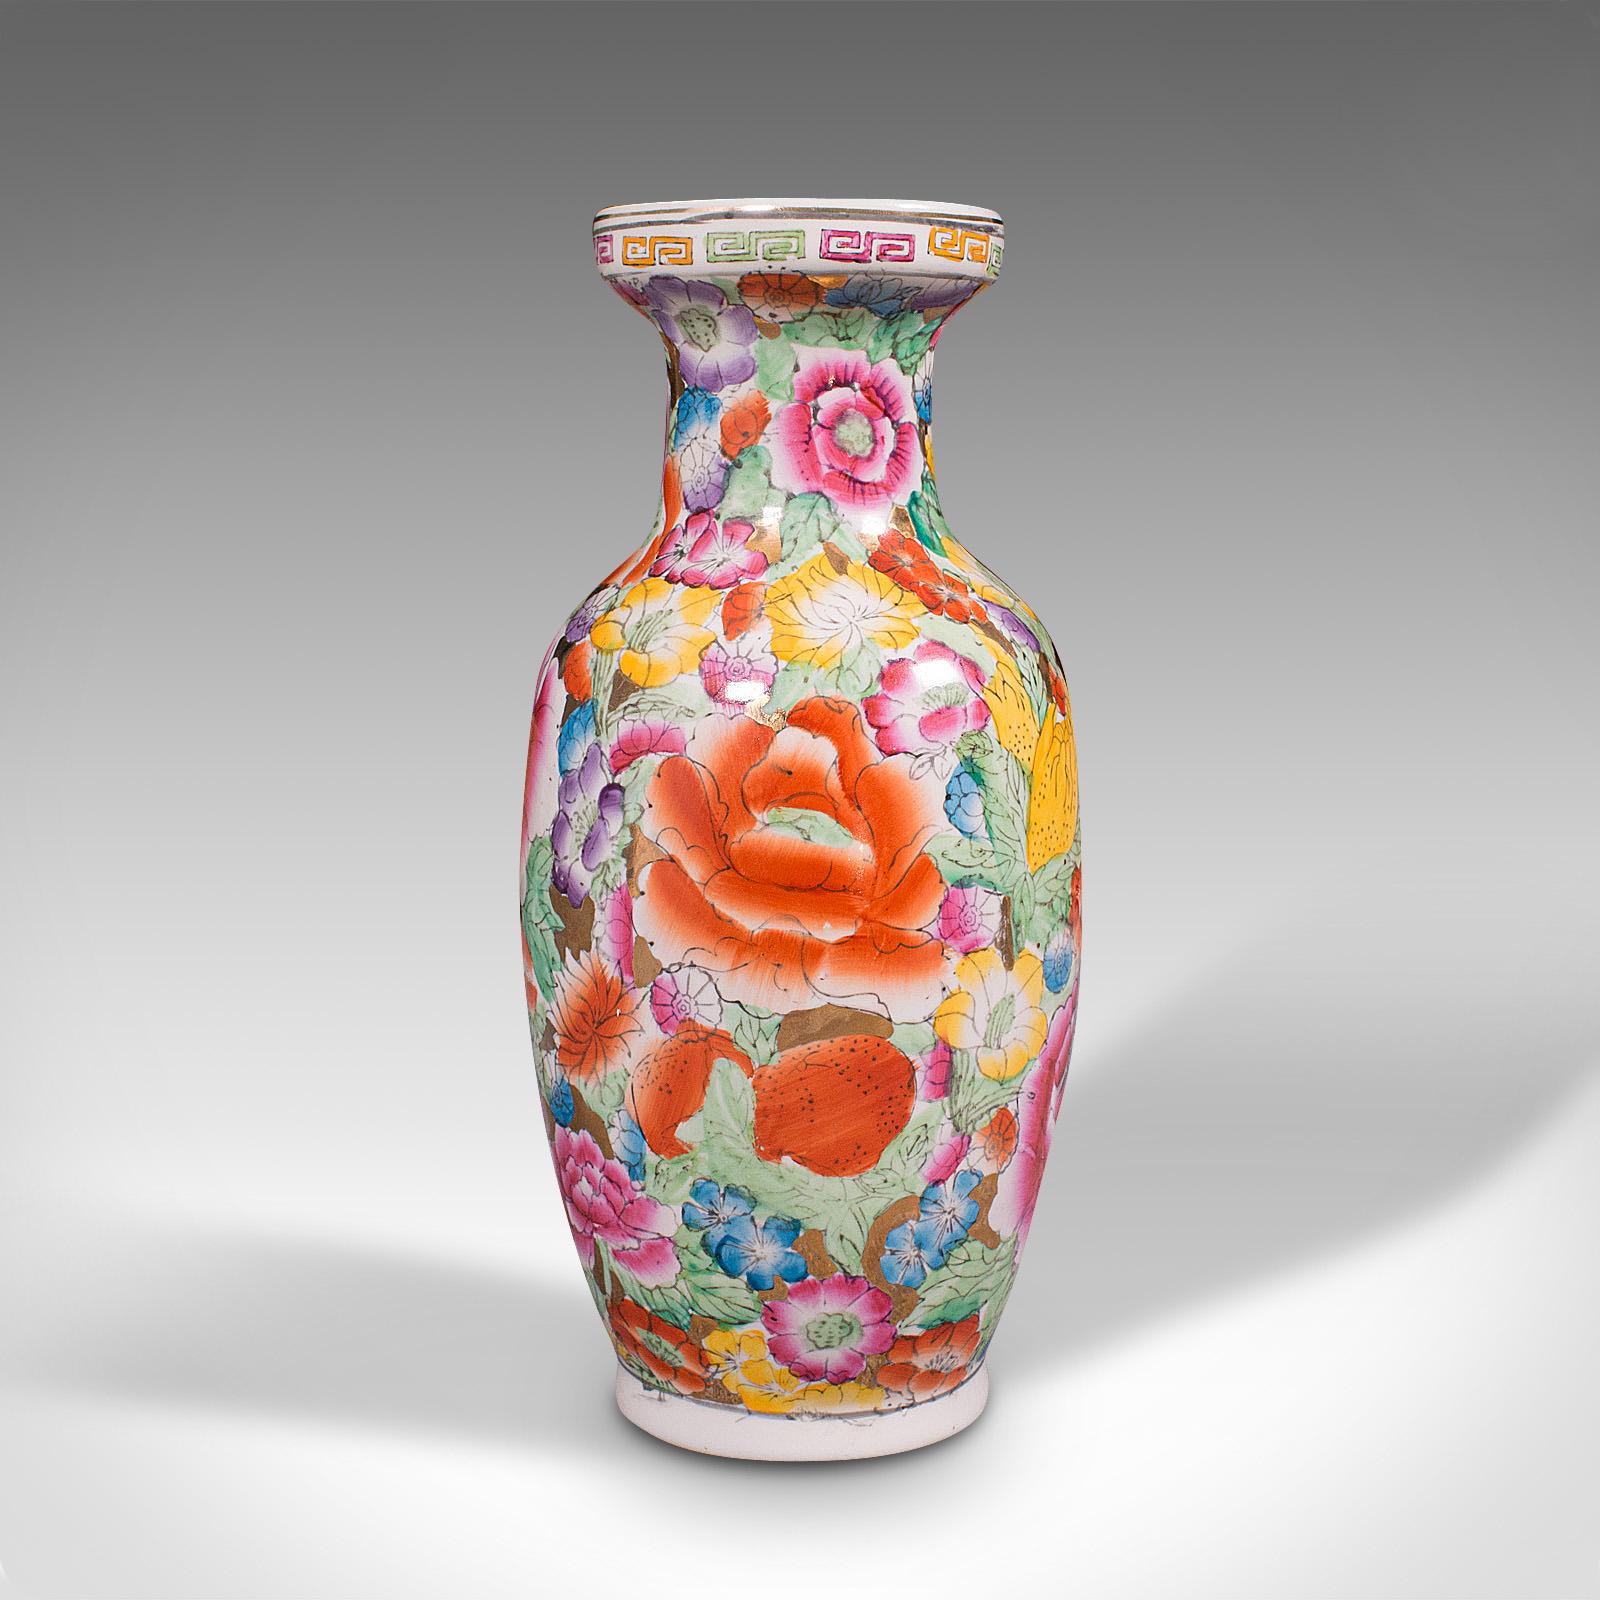 This is a small vintage display vase. A Chinese, ceramic posy urn, dating to the mid 20th century, circa 1950.

Copious decorations present a colourful visage
Displaying a desirable aged patina throughout
Decorated with flower heads with a gamut